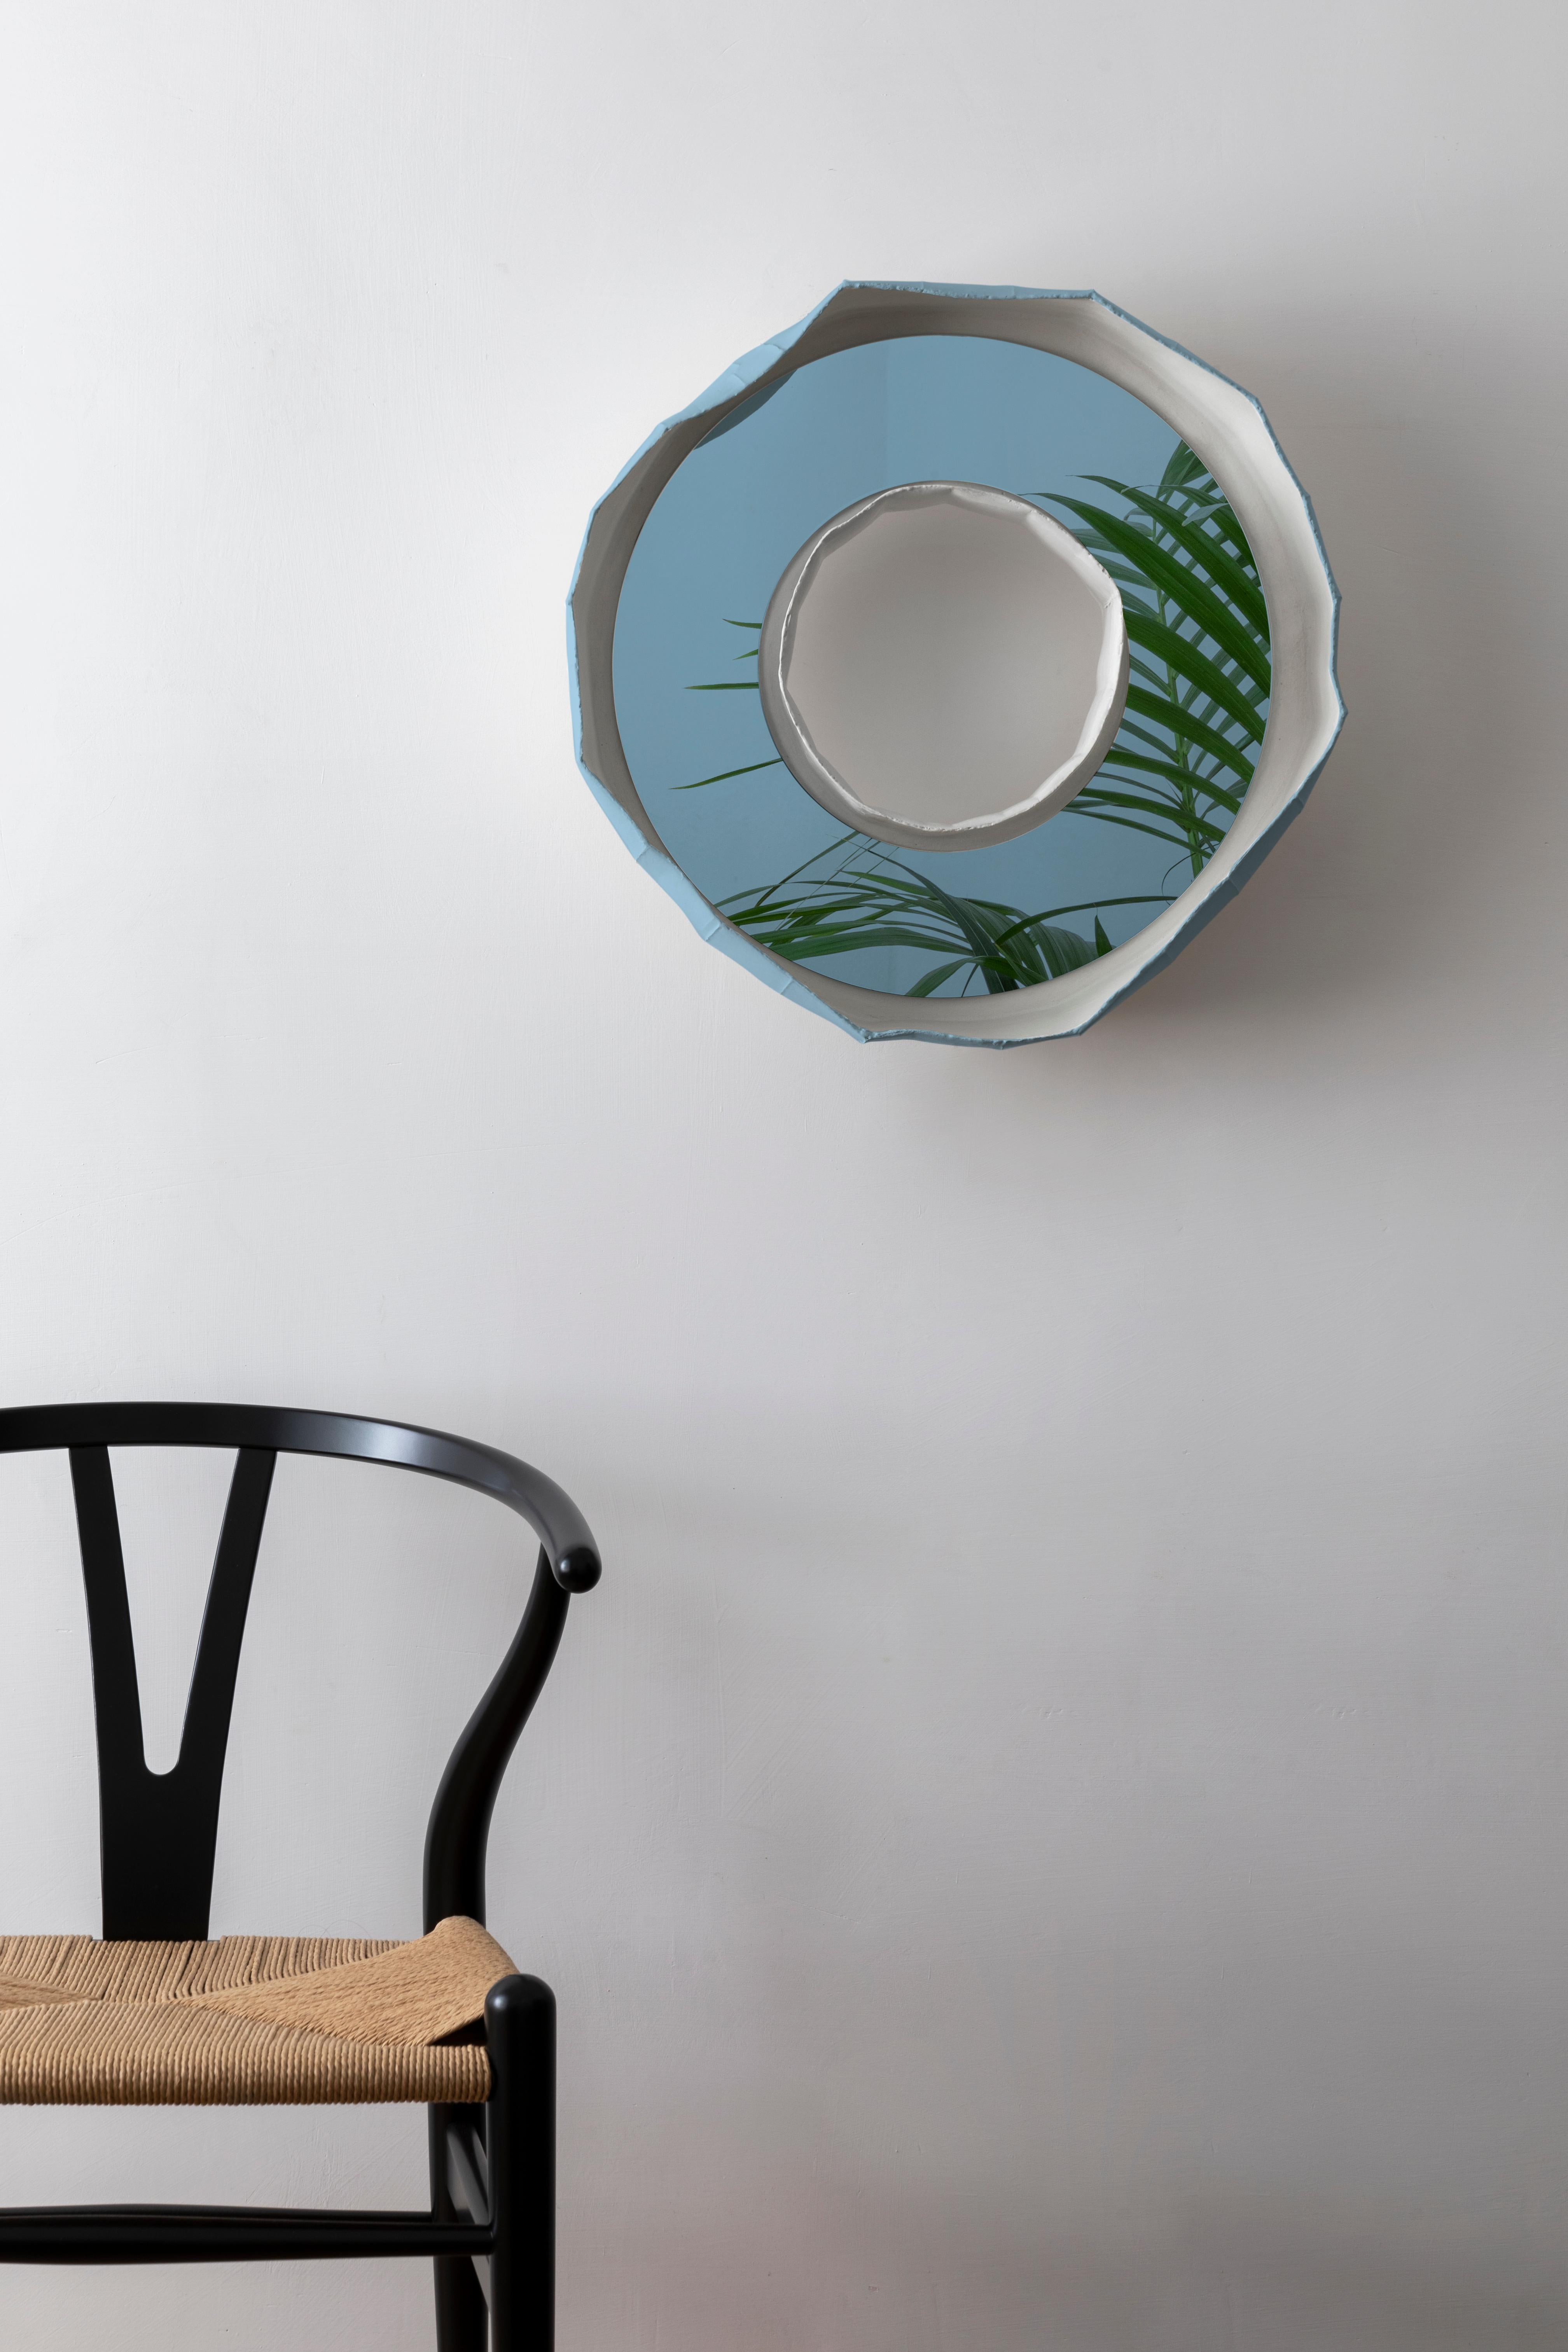 RING Nova, a stunning ceramic mirror handmade in Italy, one of 2 designs that make up the collection REFLECTIONS, the result of a collaboration between artist Paola Paronetto & designer Giovanni Botticelli, that integrates ceramic with colour and